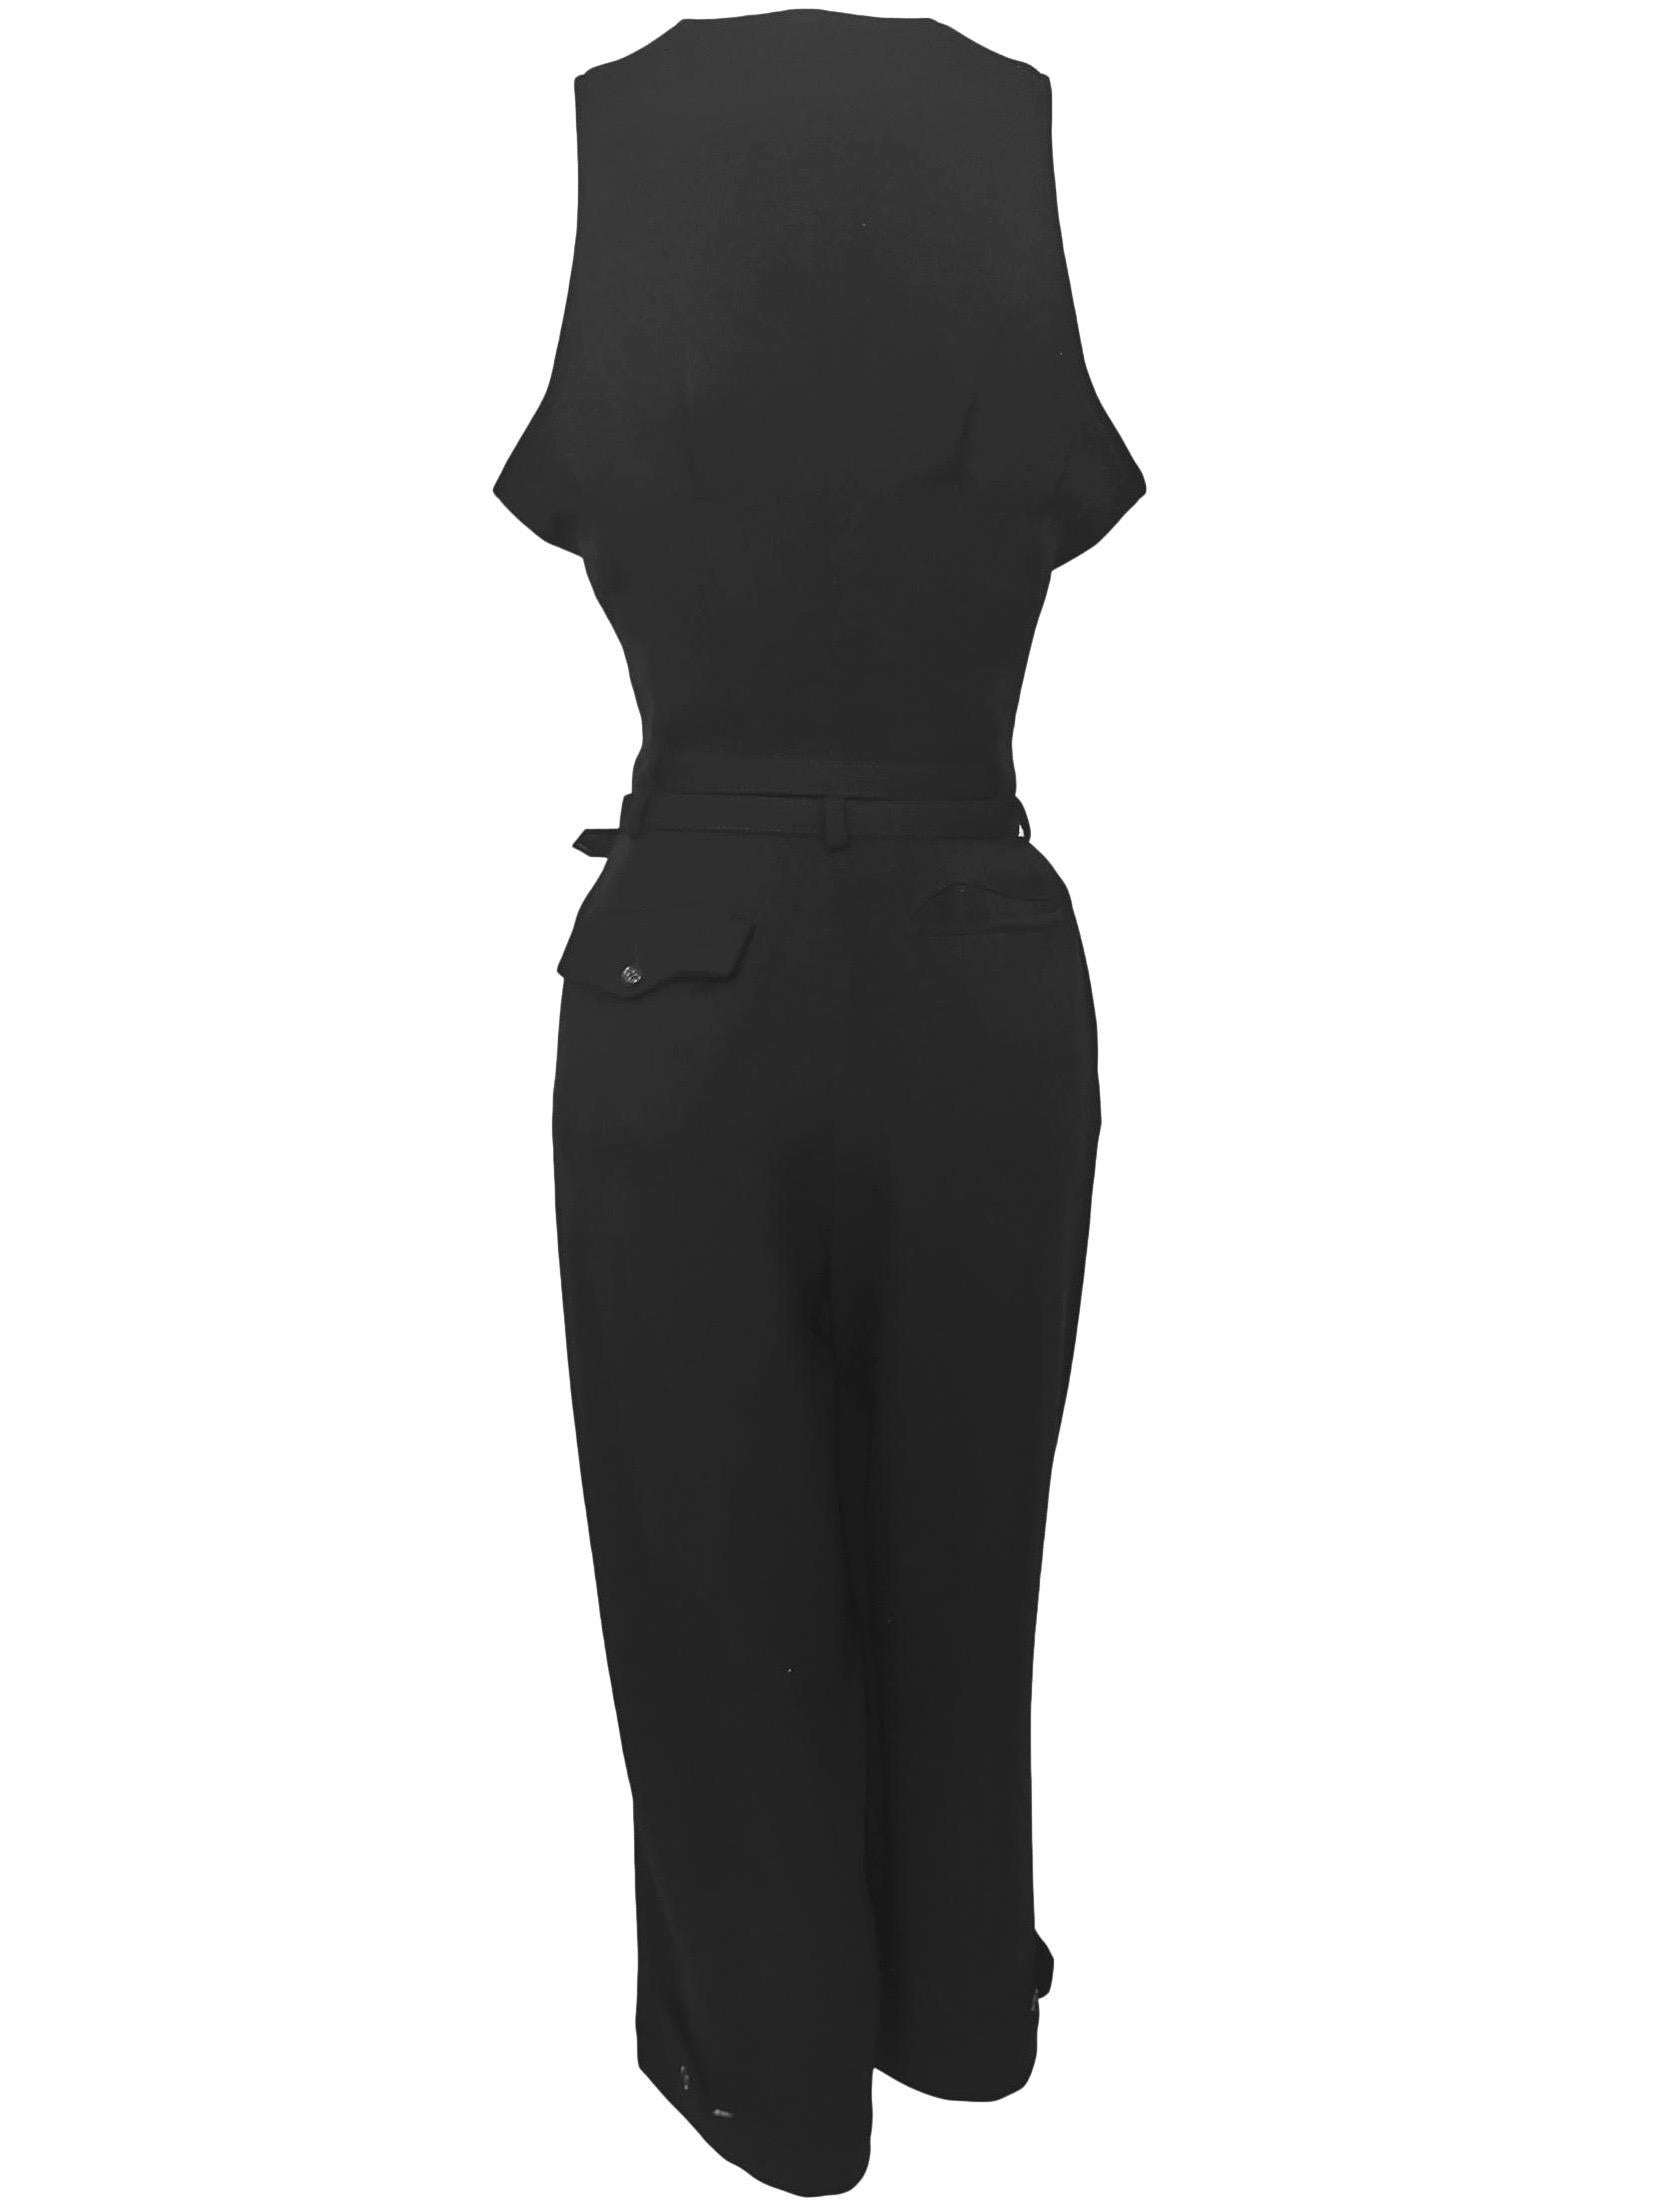 Comme des Garcons Wool Double Belted Jumpsuit AD 1989 For Sale 7